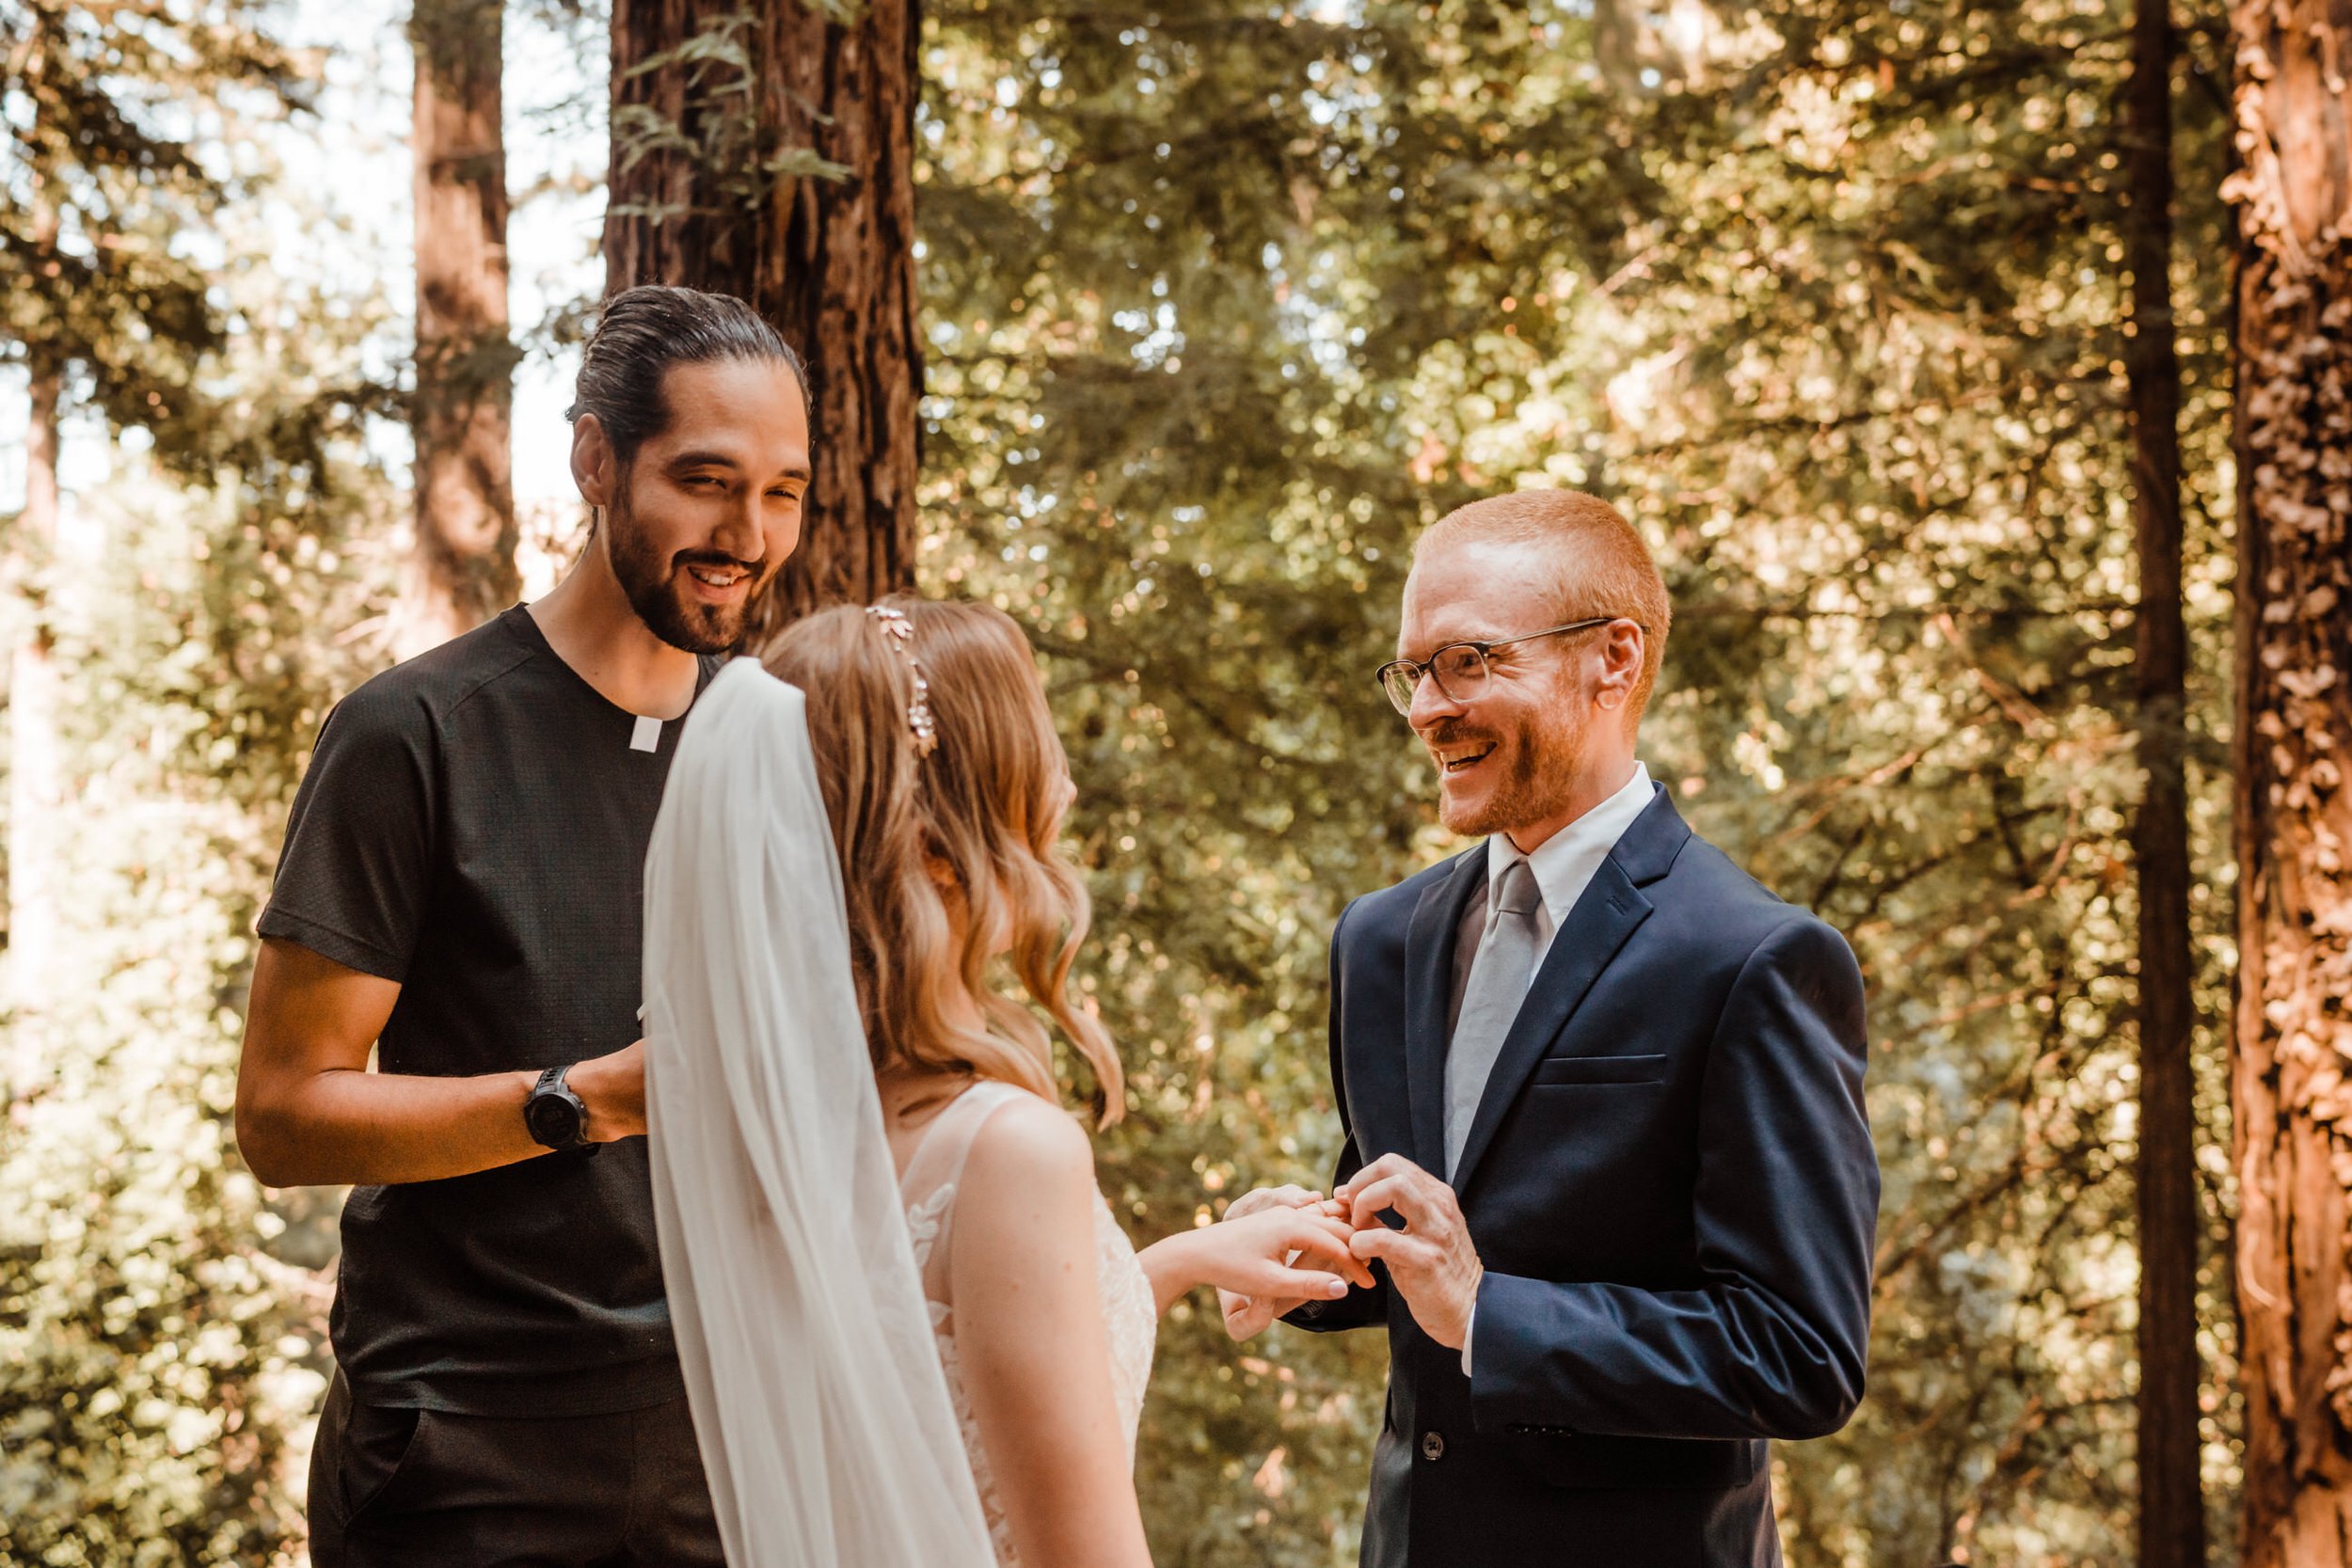 Wedding-in-the-Woods-Elopement-Ceremony-at-Airbnb-Outdoors (5).jpg